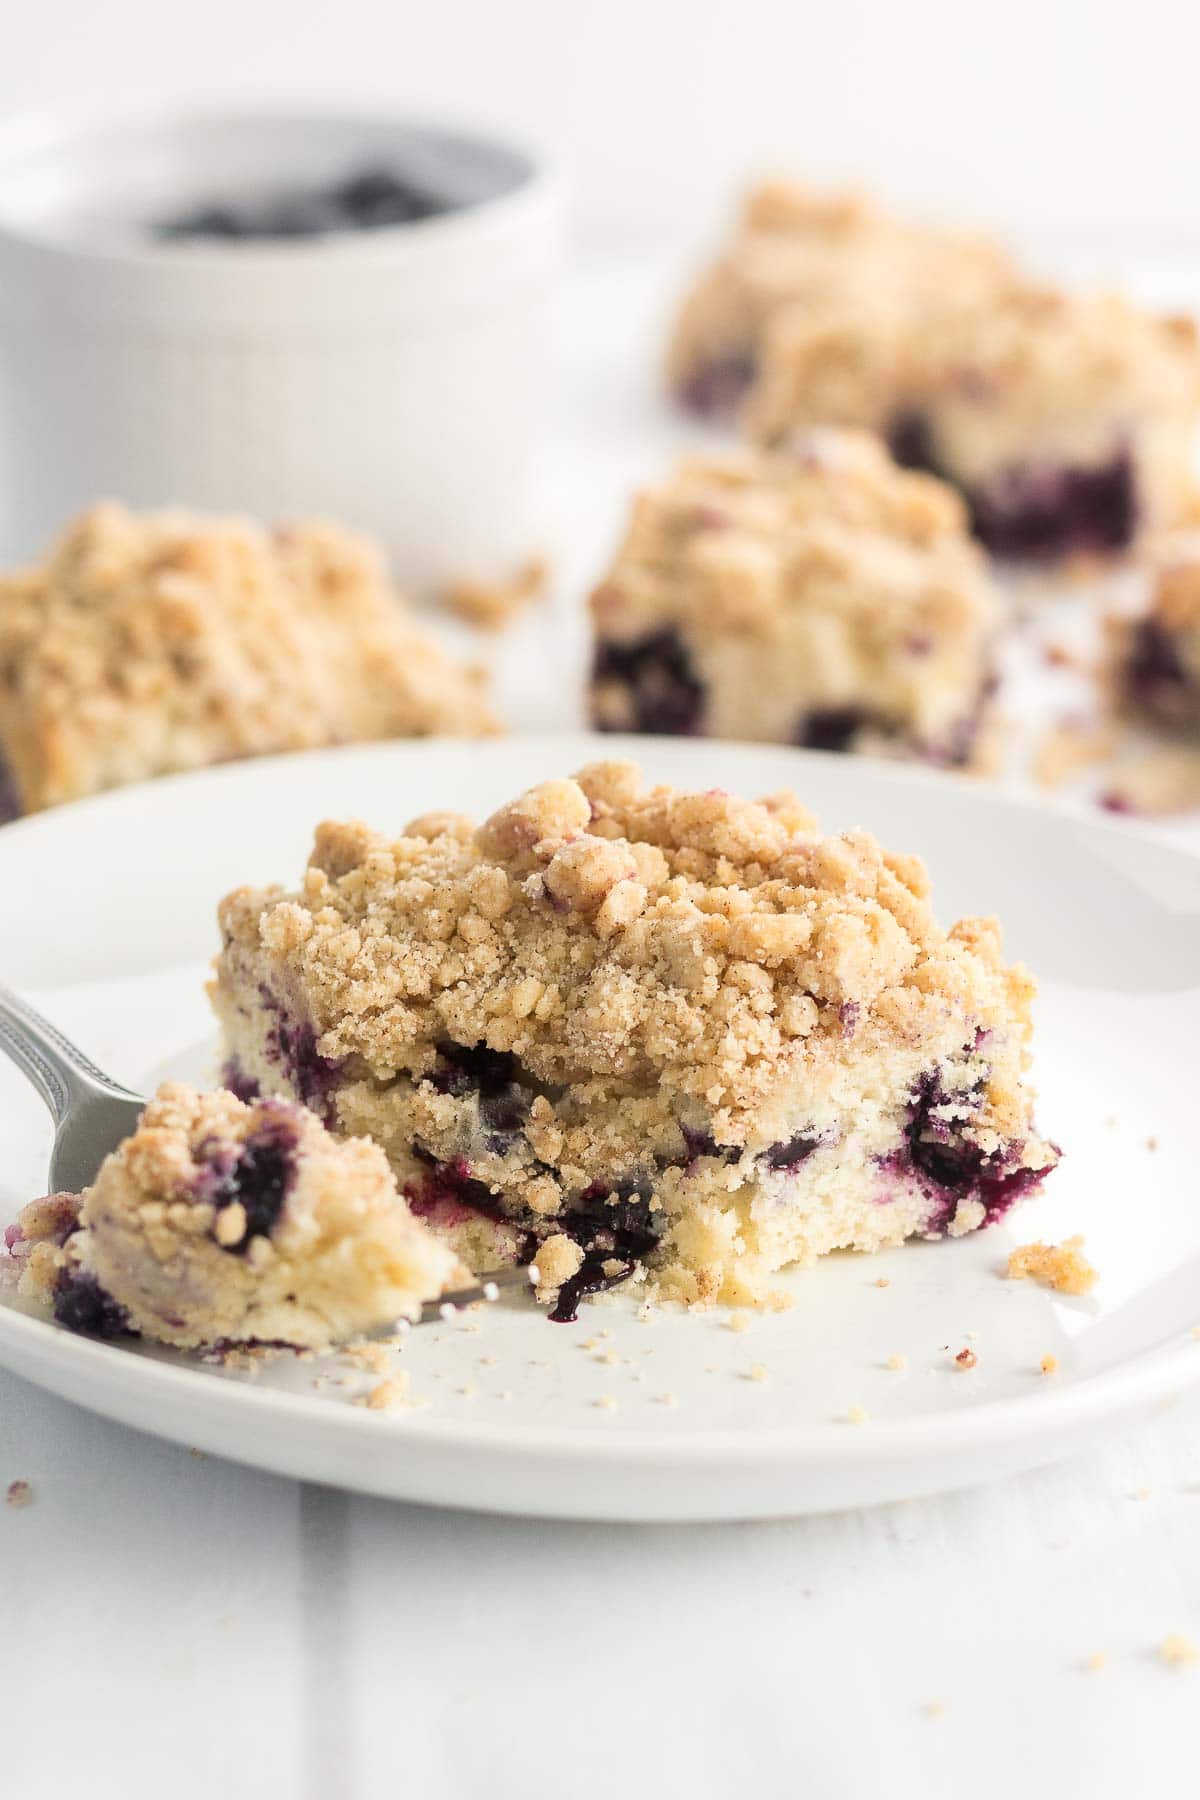 Brown Butter Blueberry Coffee Cake is what what breakfast dreams are made of. The cake itself is moist and flavorful, bursting with blueberries and it's topped with a cinnamon crumble for extra texture and flavor. When you're debating what special breakfast to make for a weekend brunch or holiday celebration, look no further.